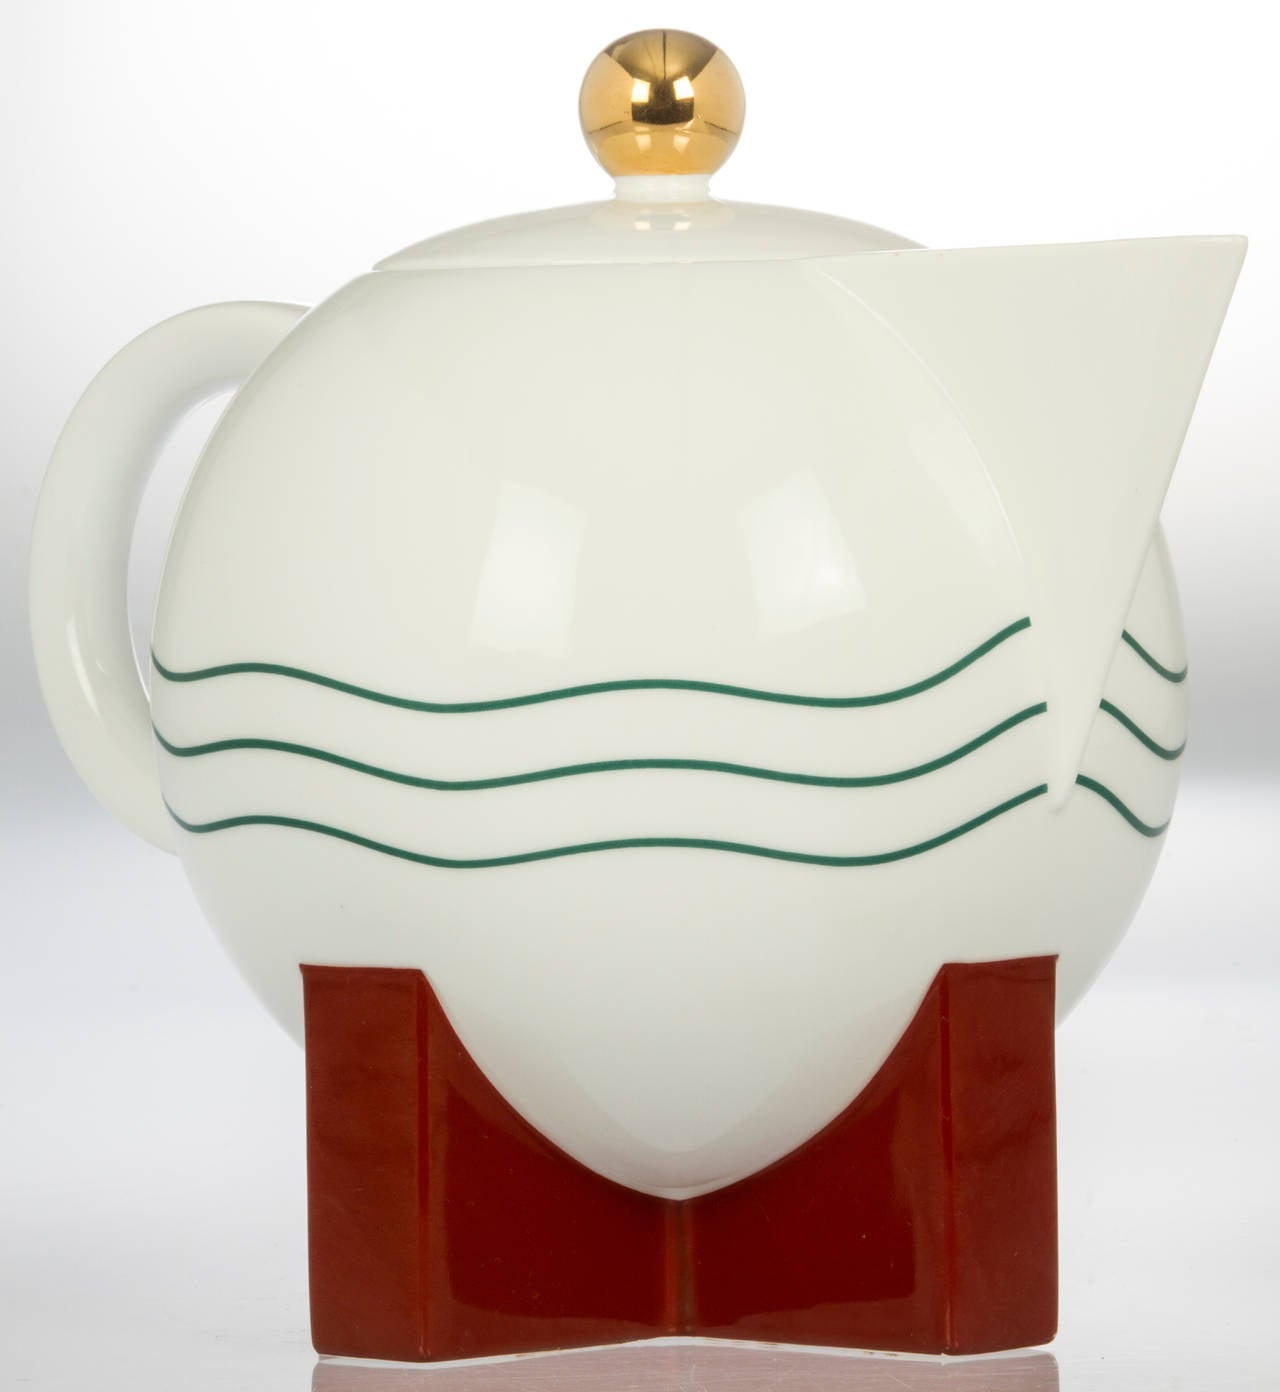 This Michael Graves designed set consists of the following: A coffee or teapot, a creamer, a lidded sugar bowl with the original spoon and coffee filter.